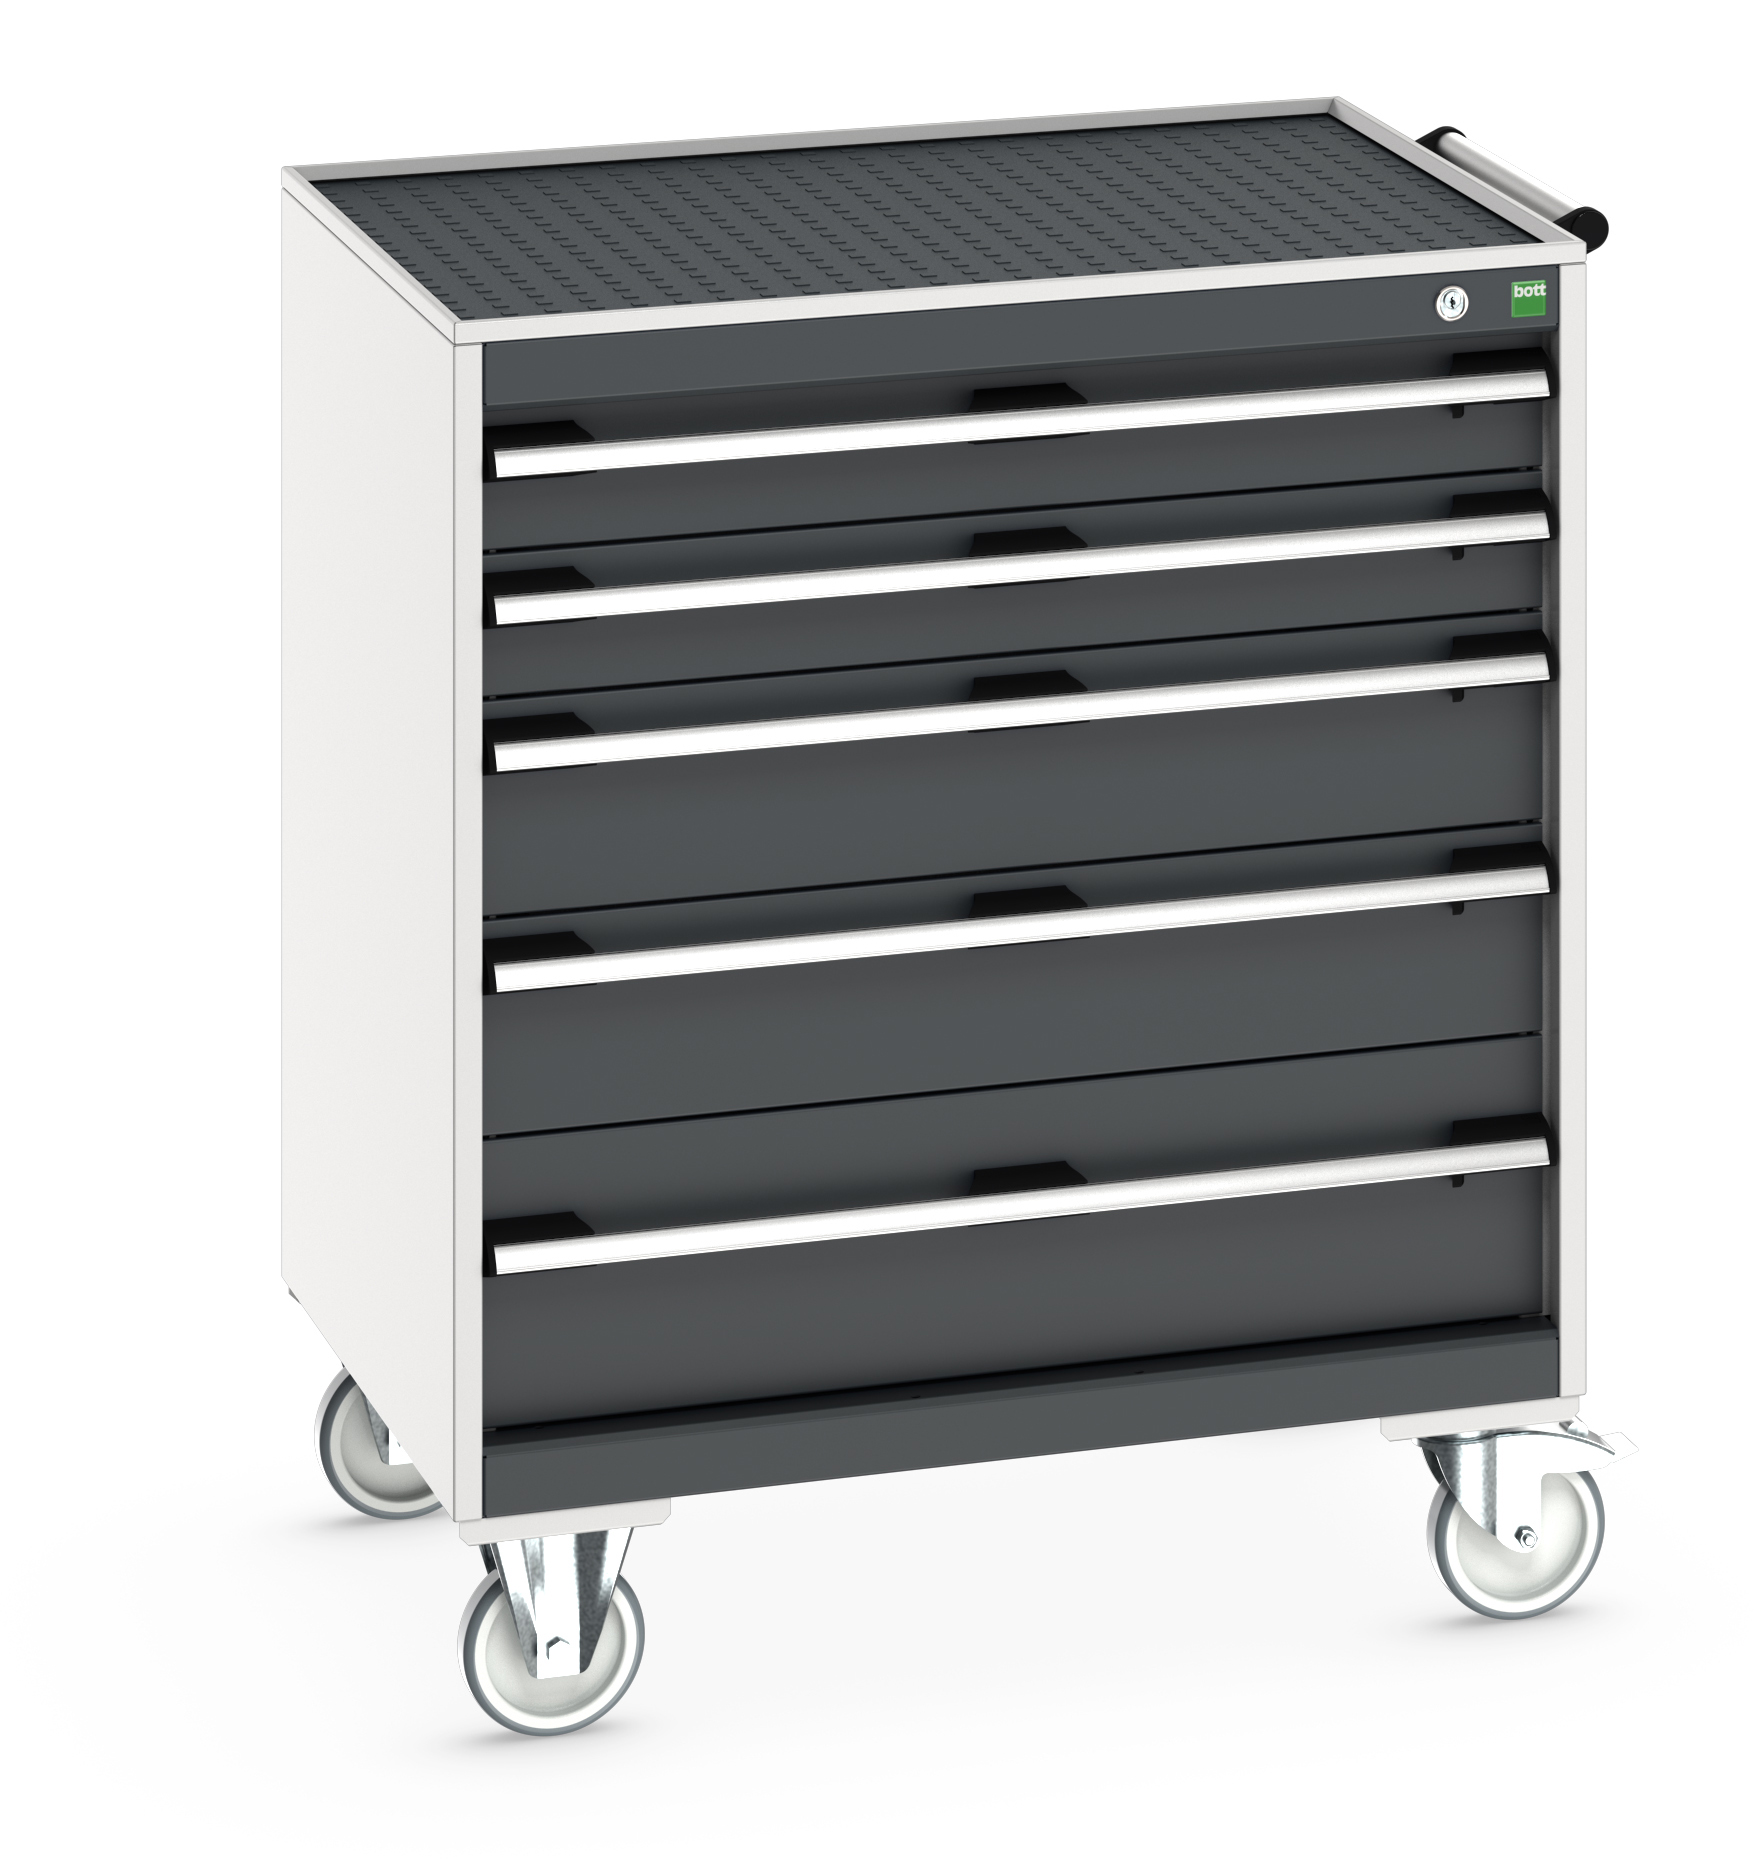 Bott Cubio Mobile Drawer Cabinet With 5 Drawers & Top Tray With Mat - 40402059.19V